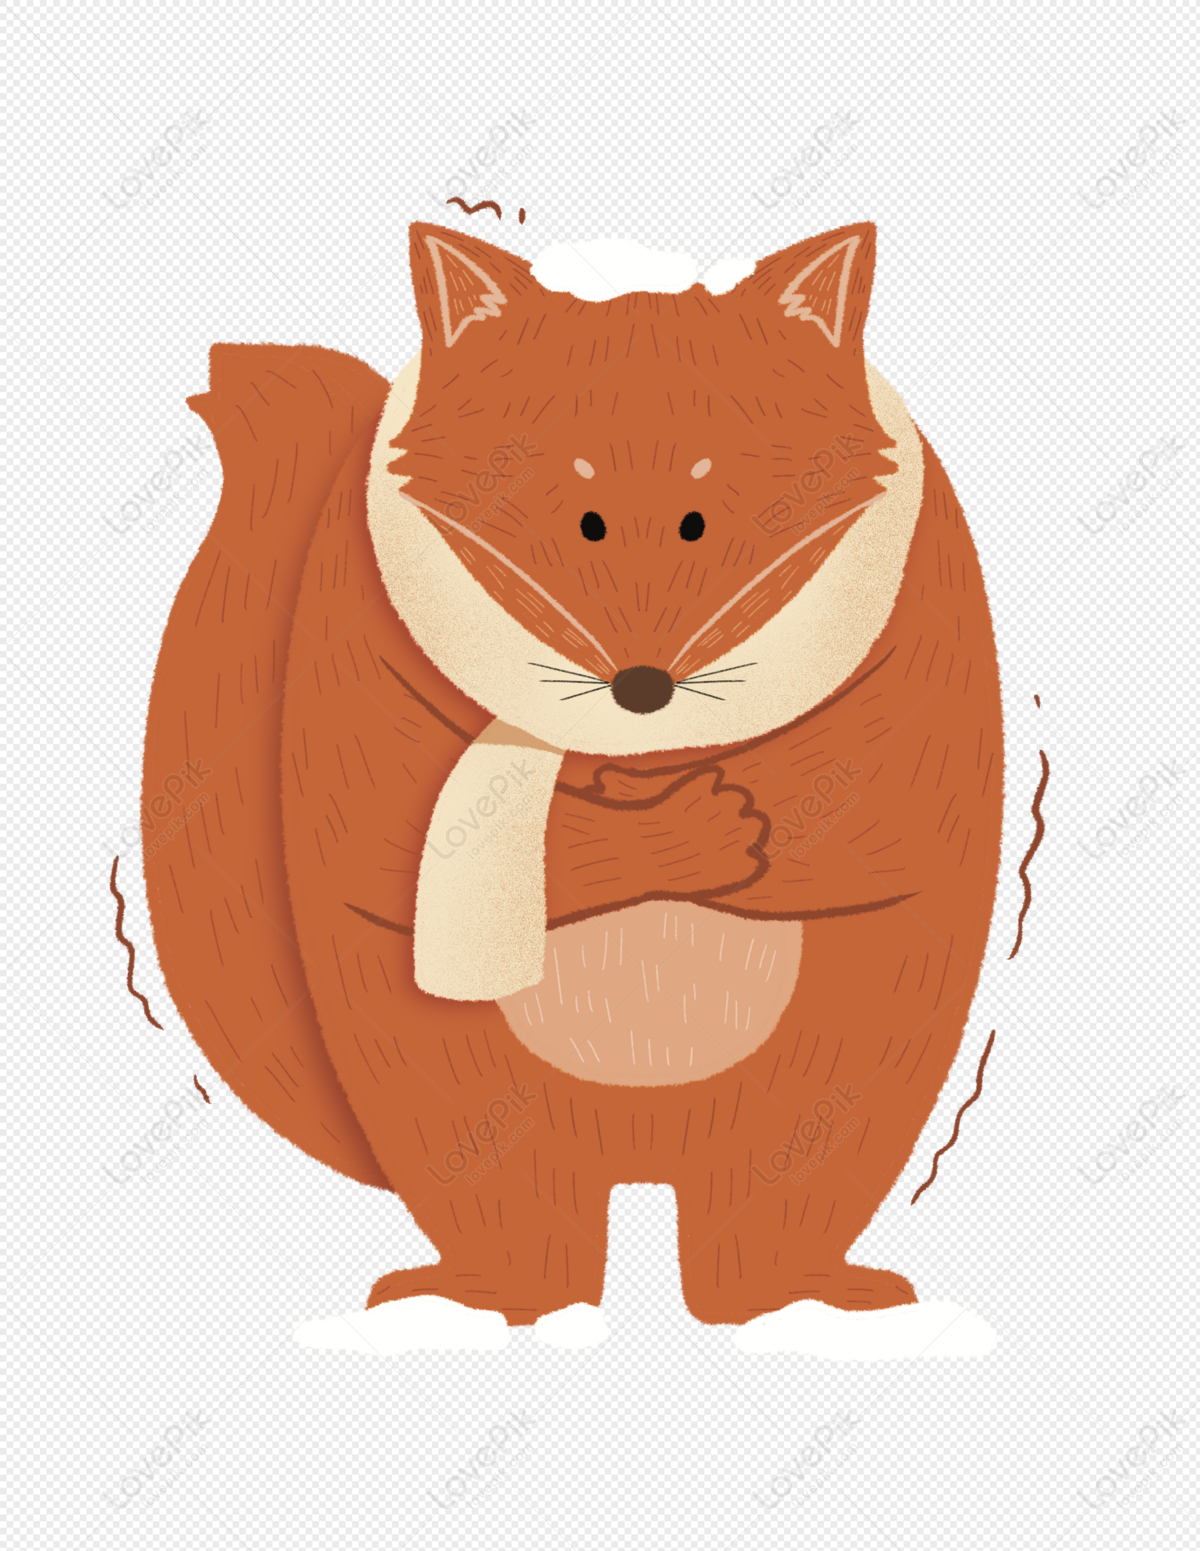 Cartoon Winter Animal Fox PNG Transparent Image And Clipart Image For Free  Download - Lovepik | 401879147